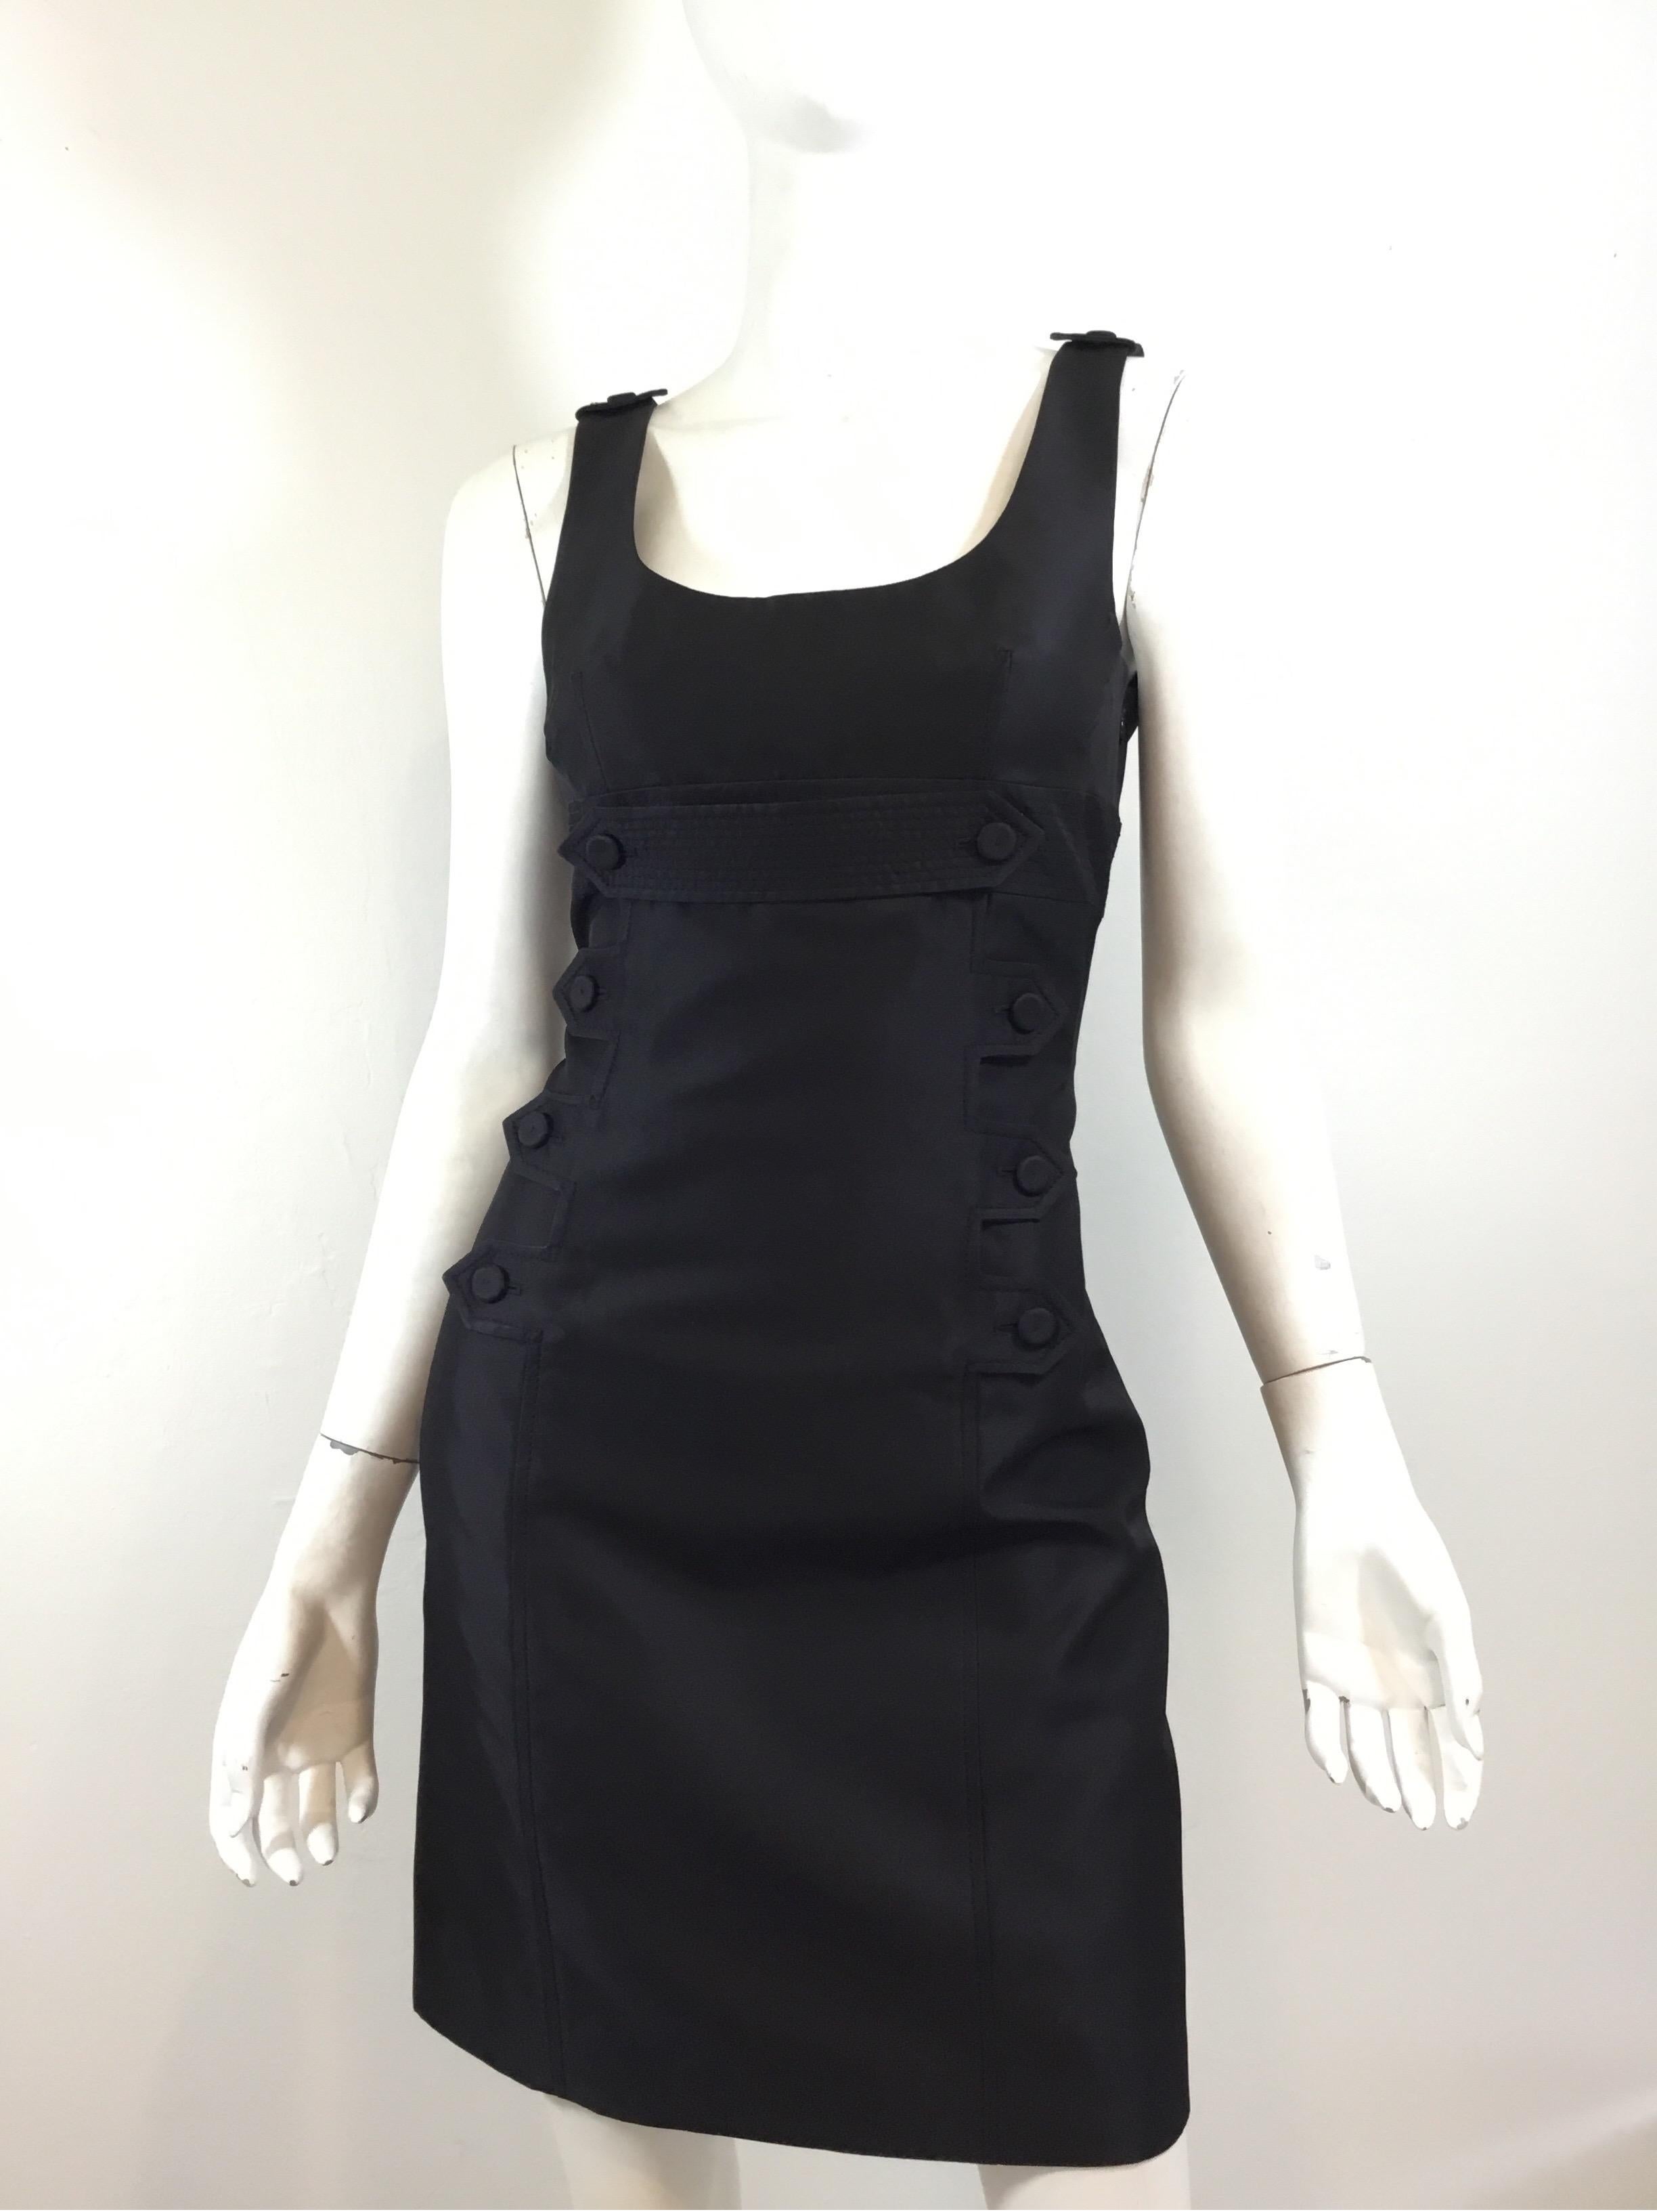 Givenchy Dress featured in a black with decorative buttons along the front. Dress has a side zipper fastening and full lining. Size 38, made in France. 

Bust 33”, waist 30”, hips 34”, length 32”